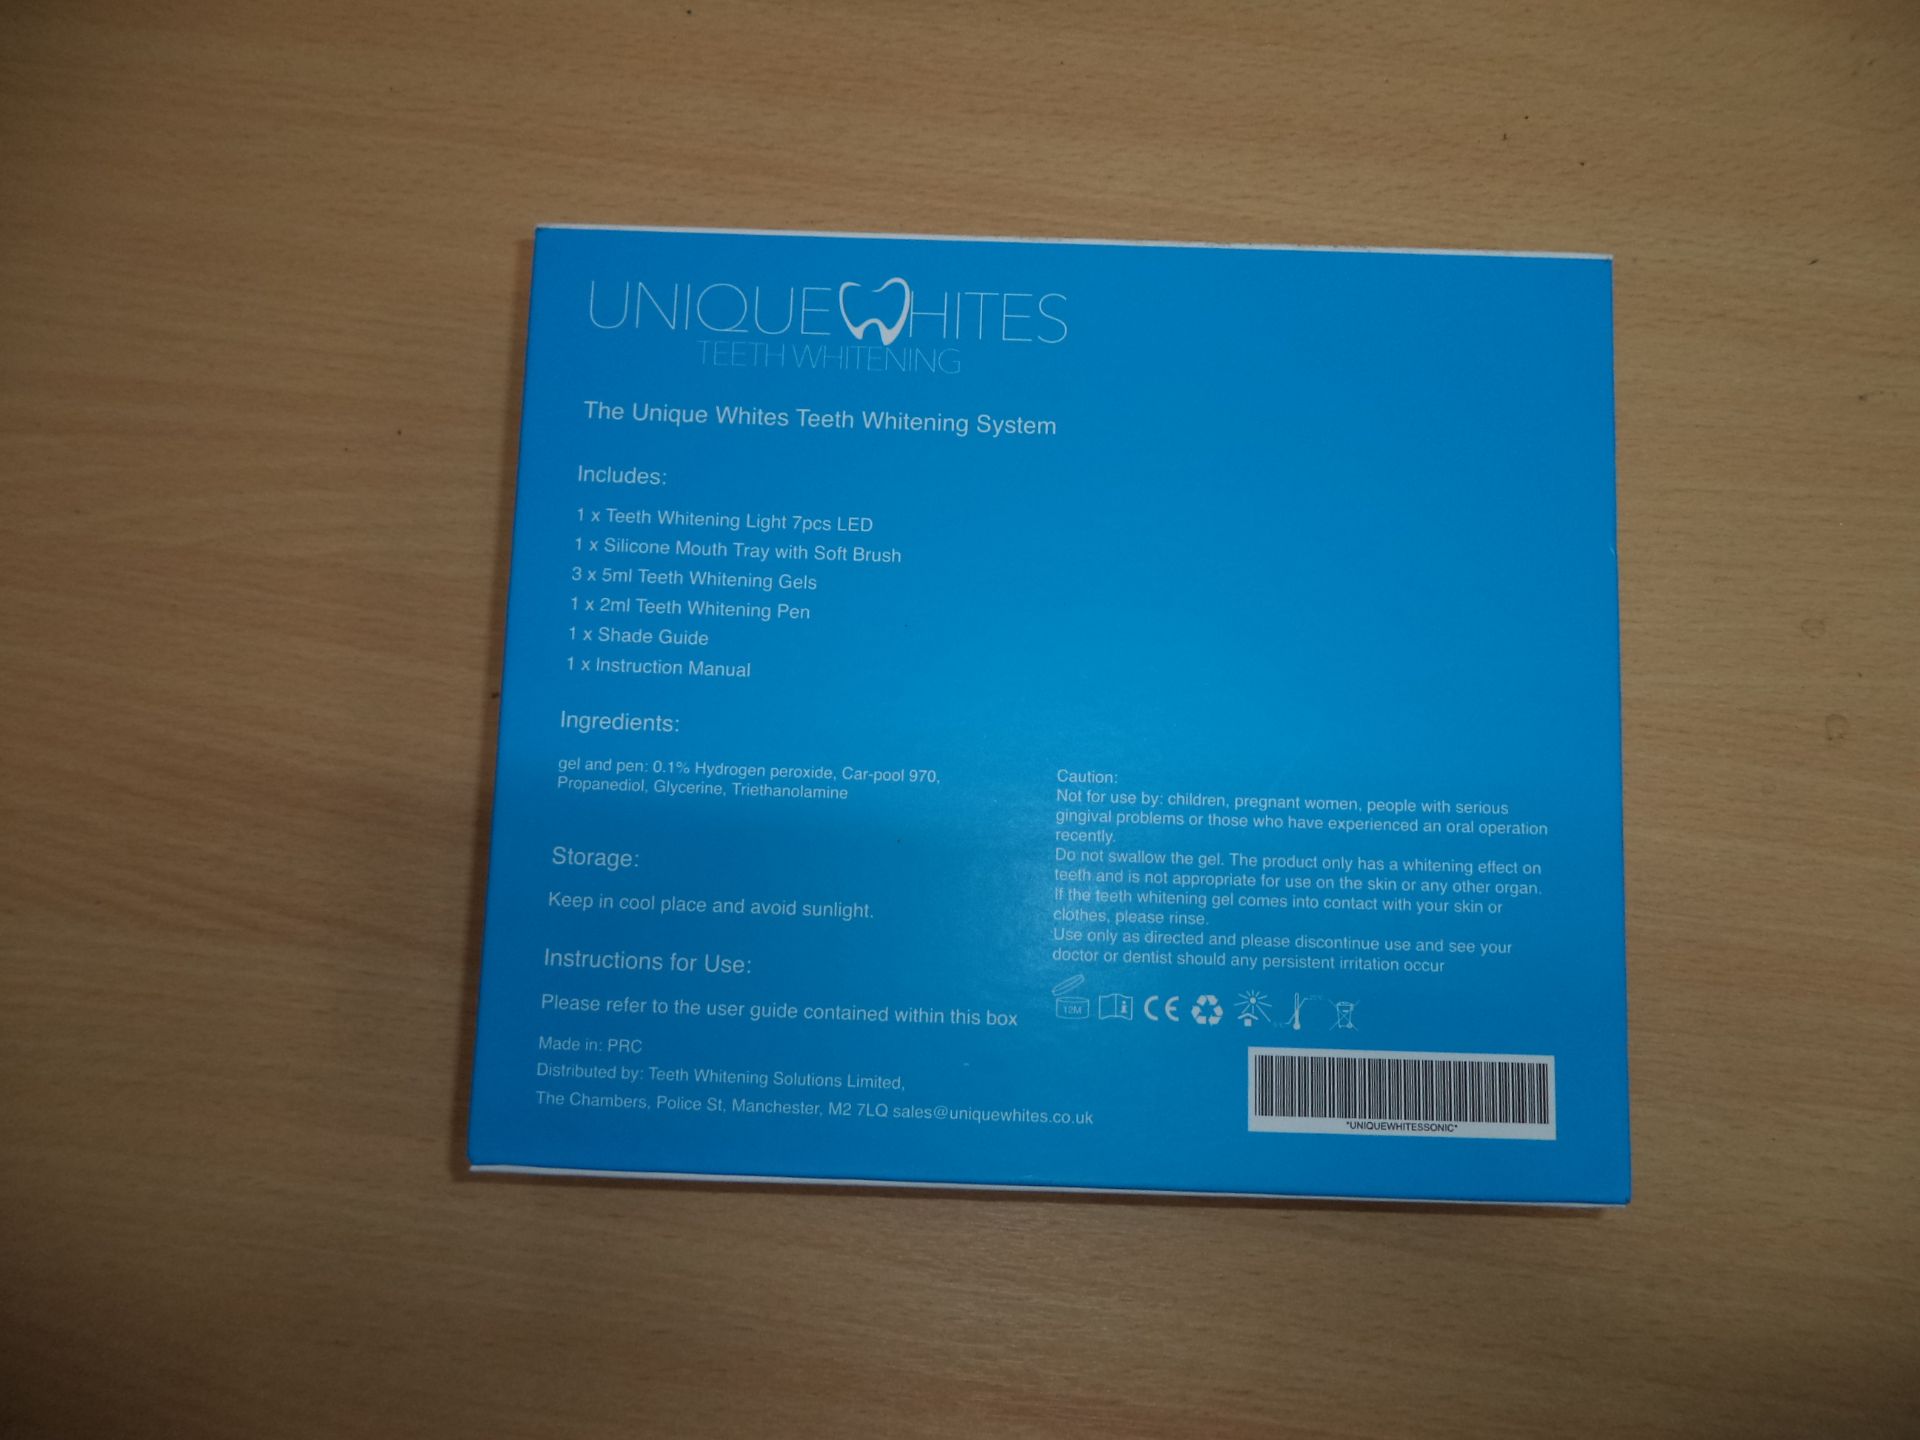 10 off Unique Whites teeth whitening kits, each in a retail display box with magnetic closing lid, - Image 8 of 8